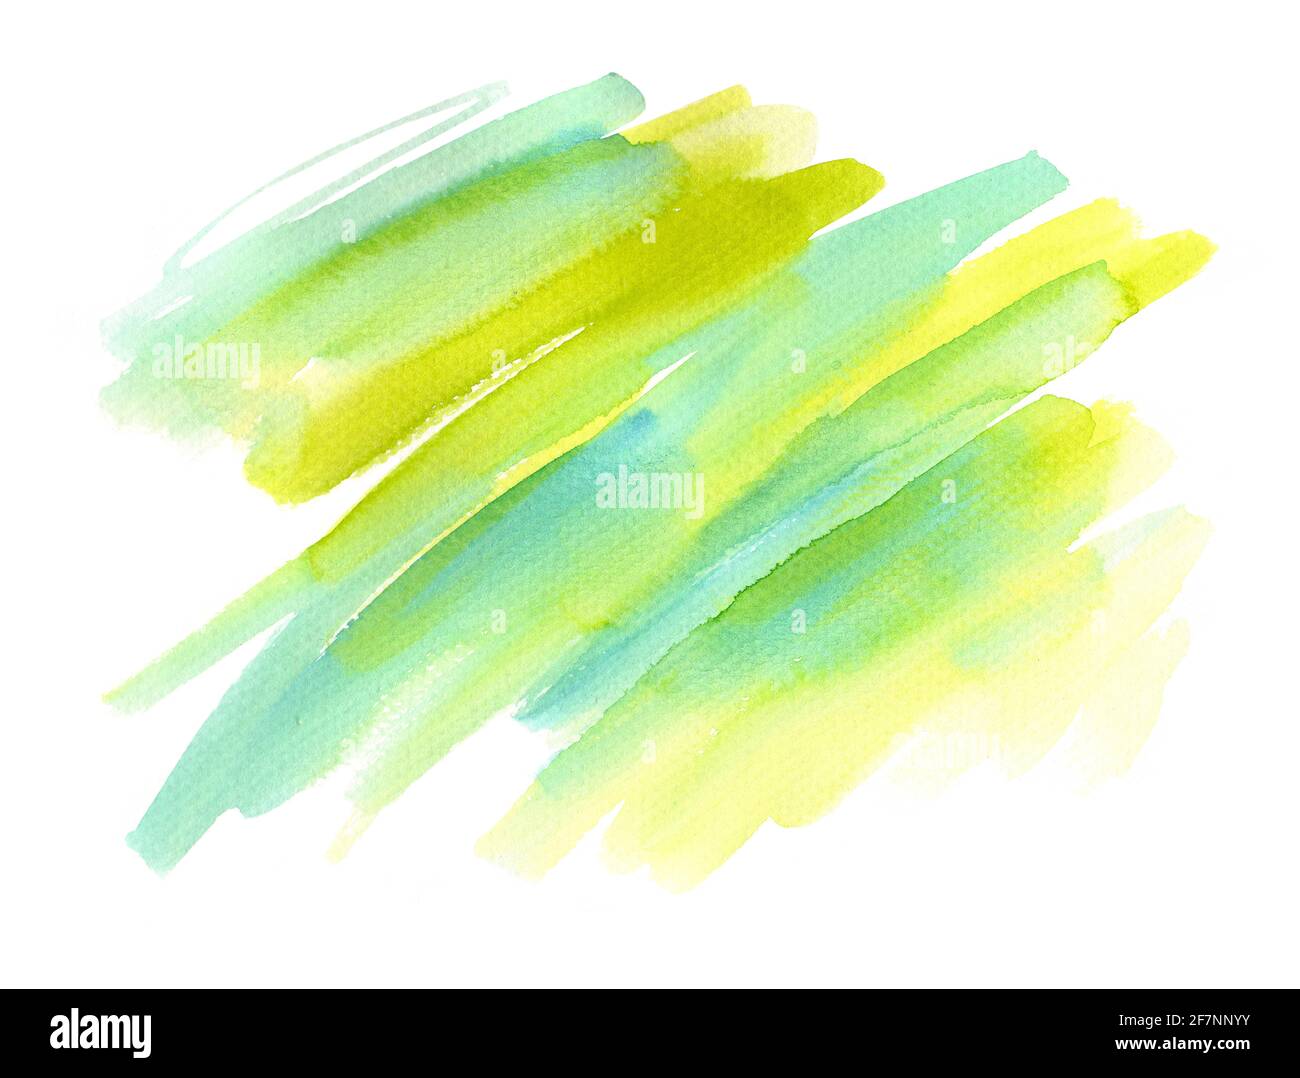 green-blue abstract background. Watercolor hand painting on white background.  Grunge design element for poster, flyer, name card Stock Photo - Alamy